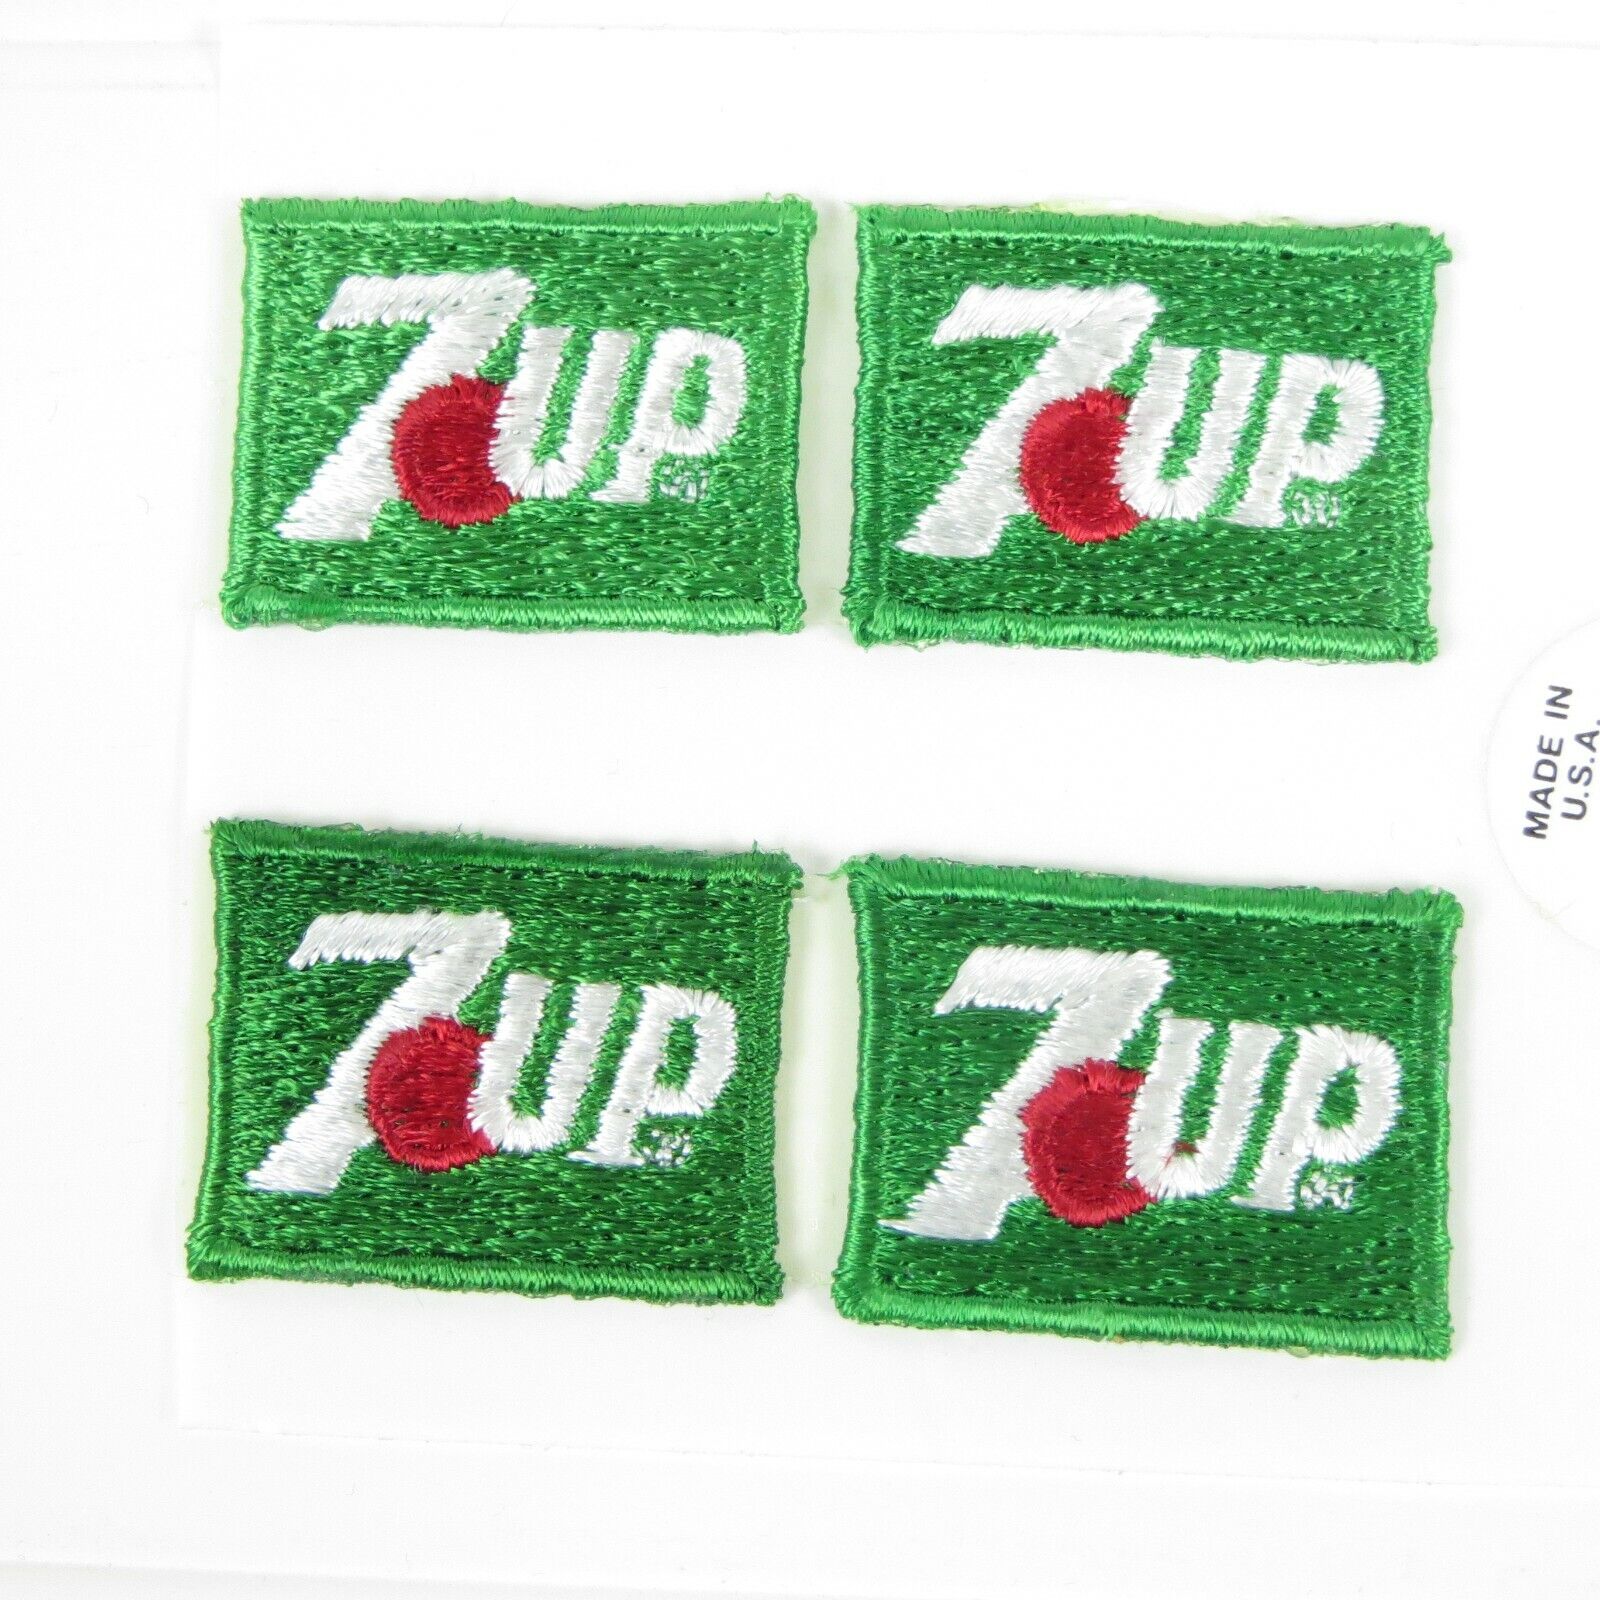 7-UP SODA - VINTAGE SMALL IRON-ON FABRIC UNIFORM PATCHES - 1.25\